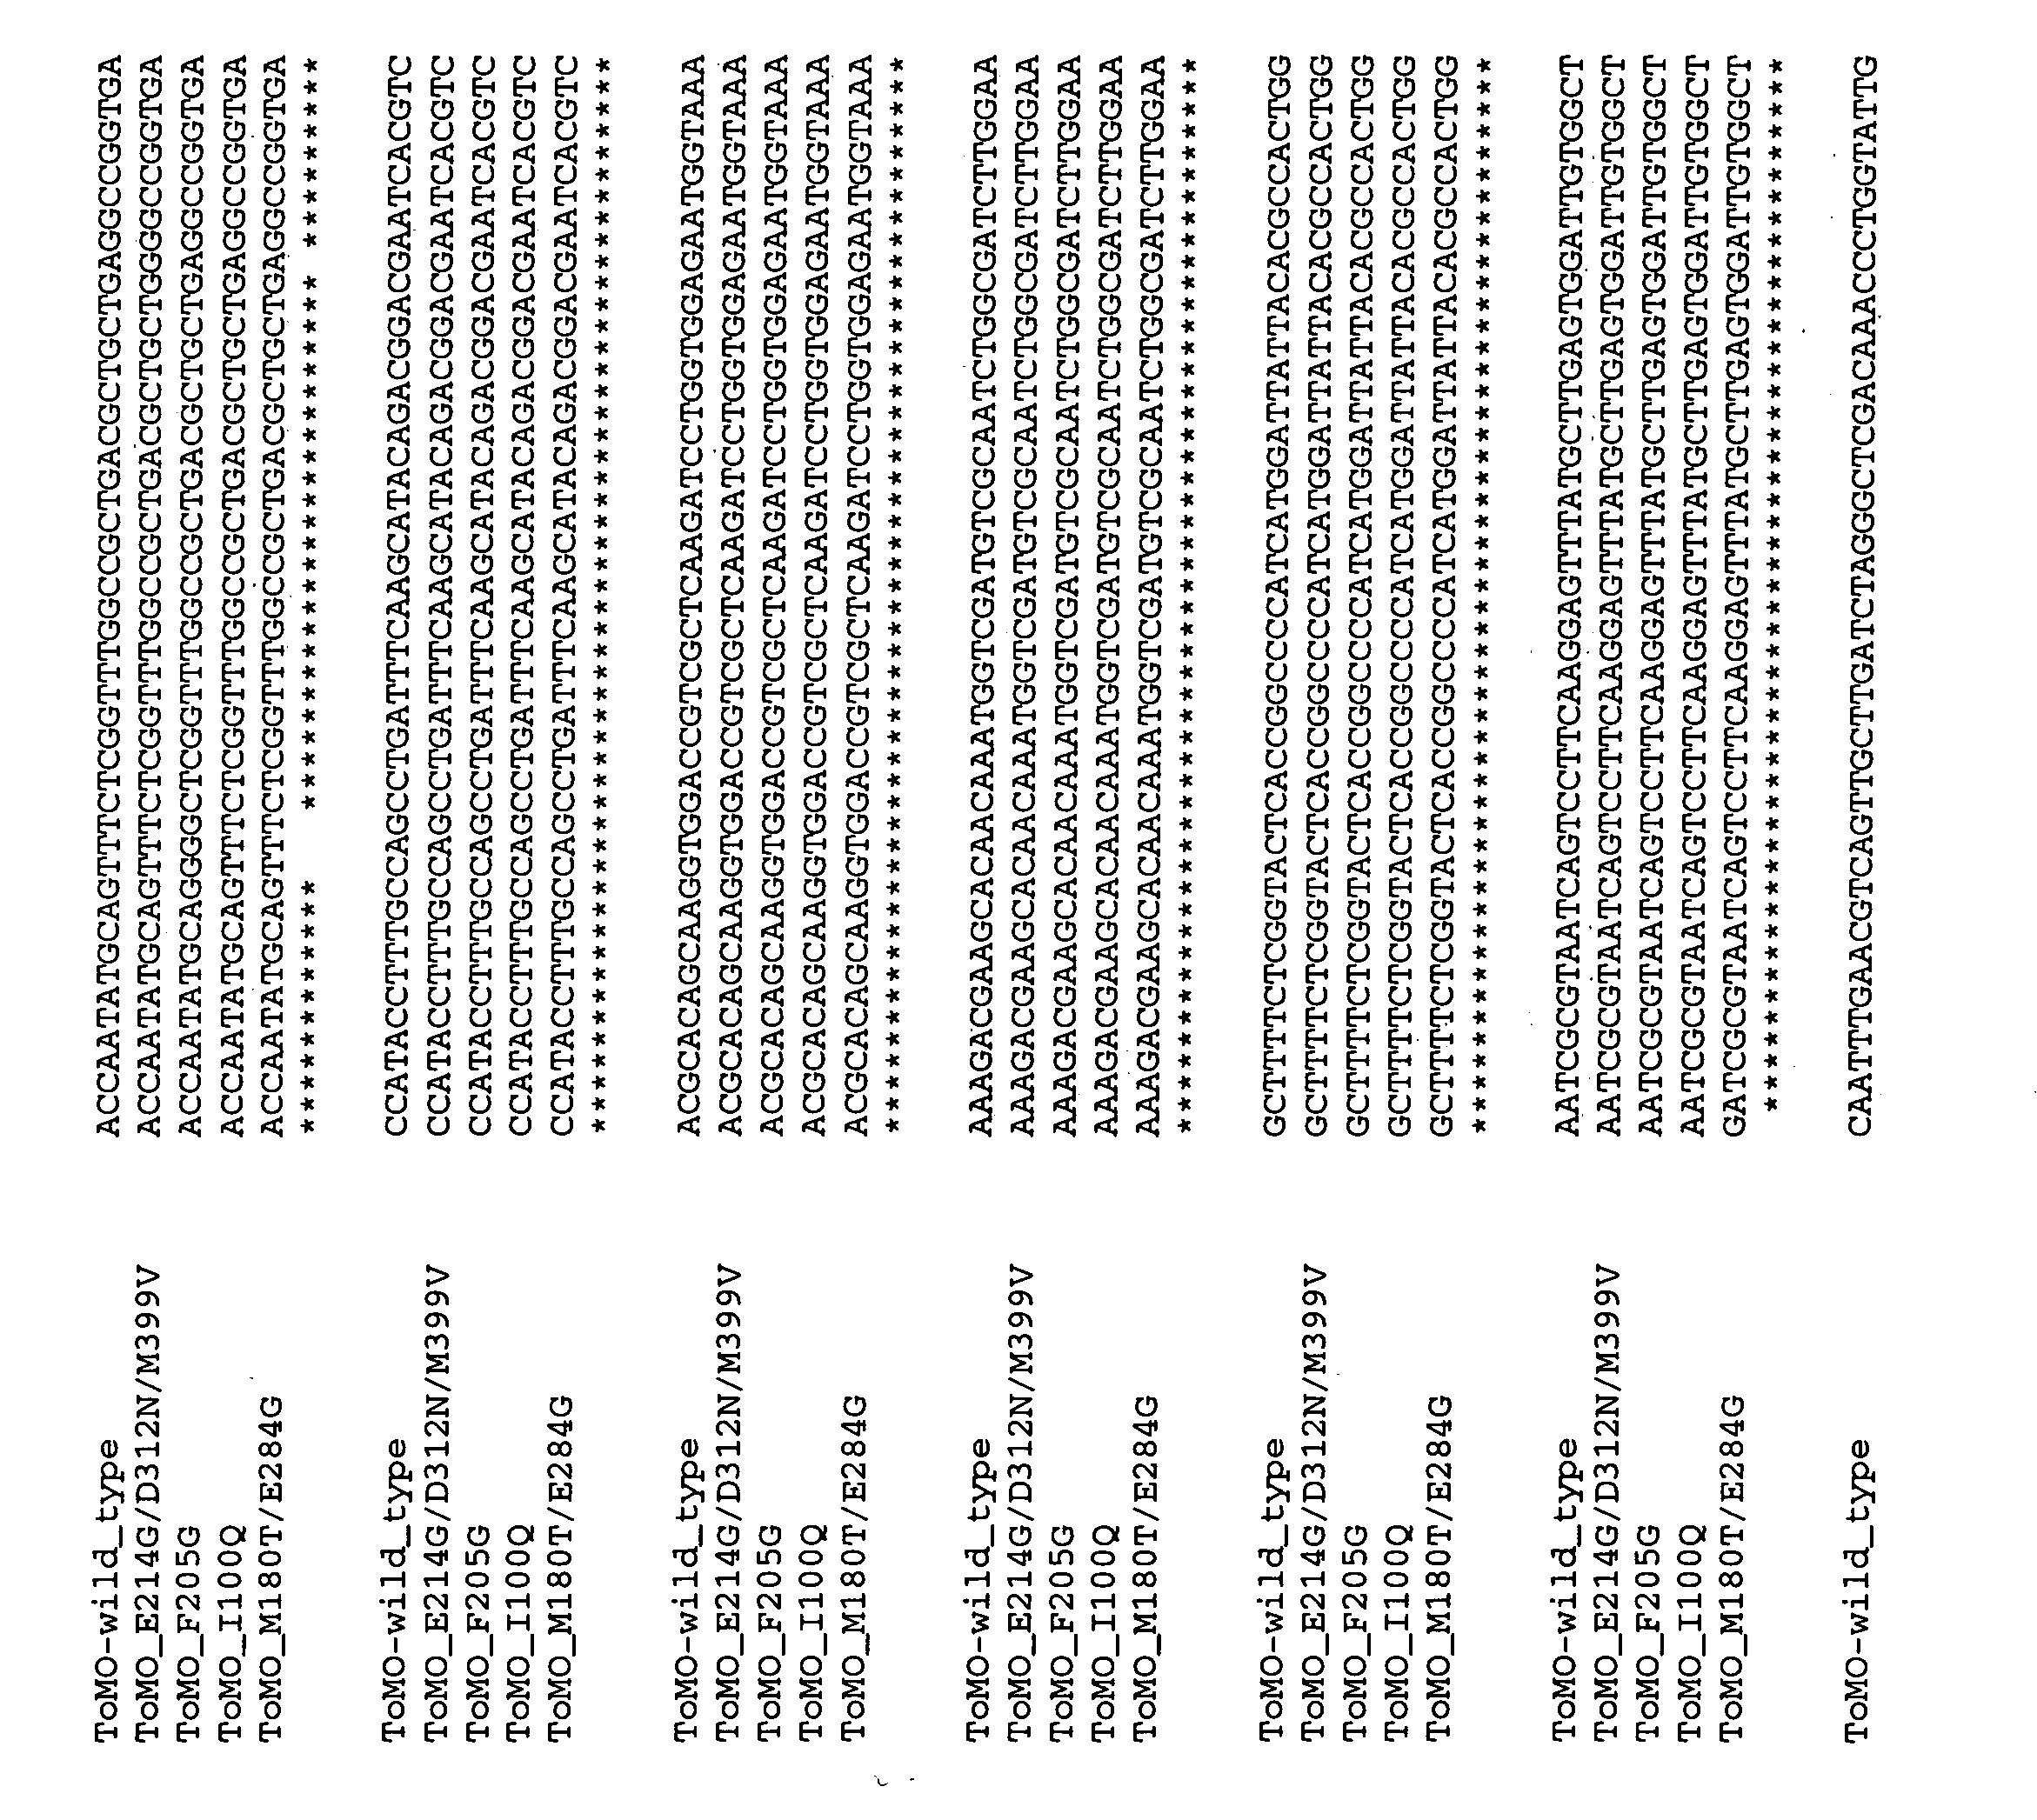 Directed evolution of recombinant monooxygenase nucleic acids and related polypeptides and methods of use